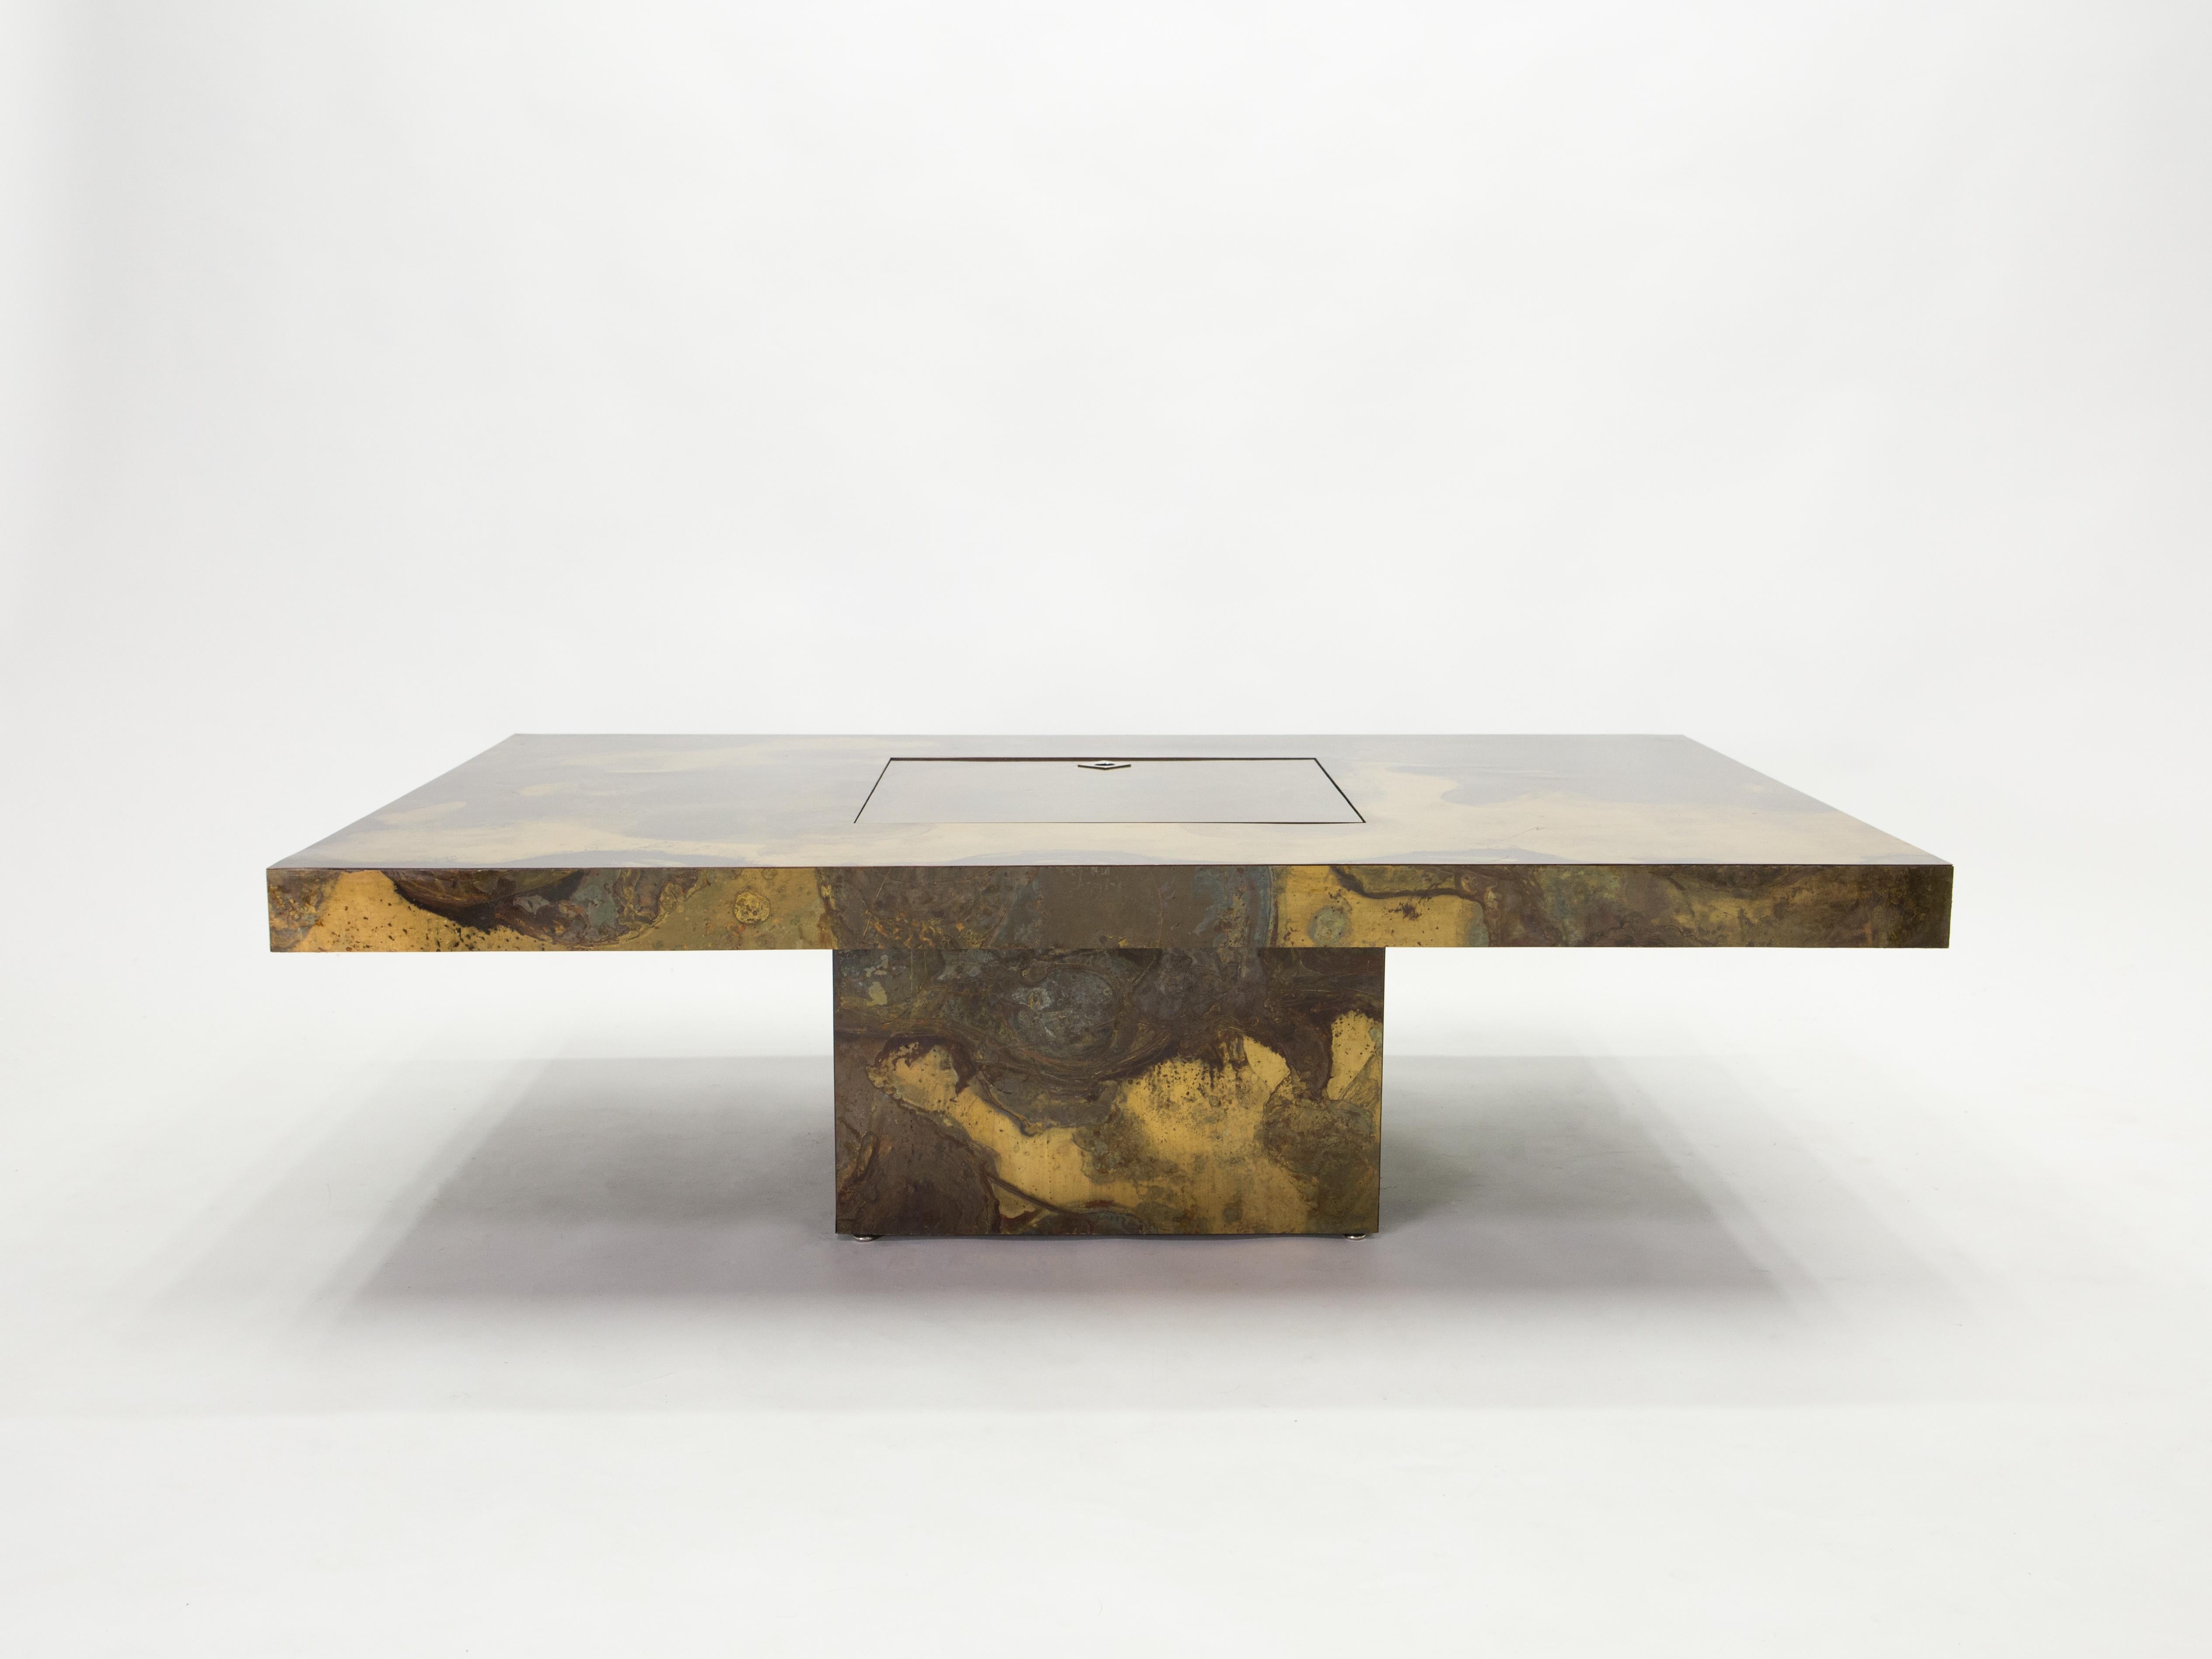 This unique large coffee table was created by Isabelle and Richard Faure for Parisian design firm Maison Honore in the late 1970s. Entirely covered by an incredibly decorated oxidized and patinated brass all over, that was then fixed and varnished.